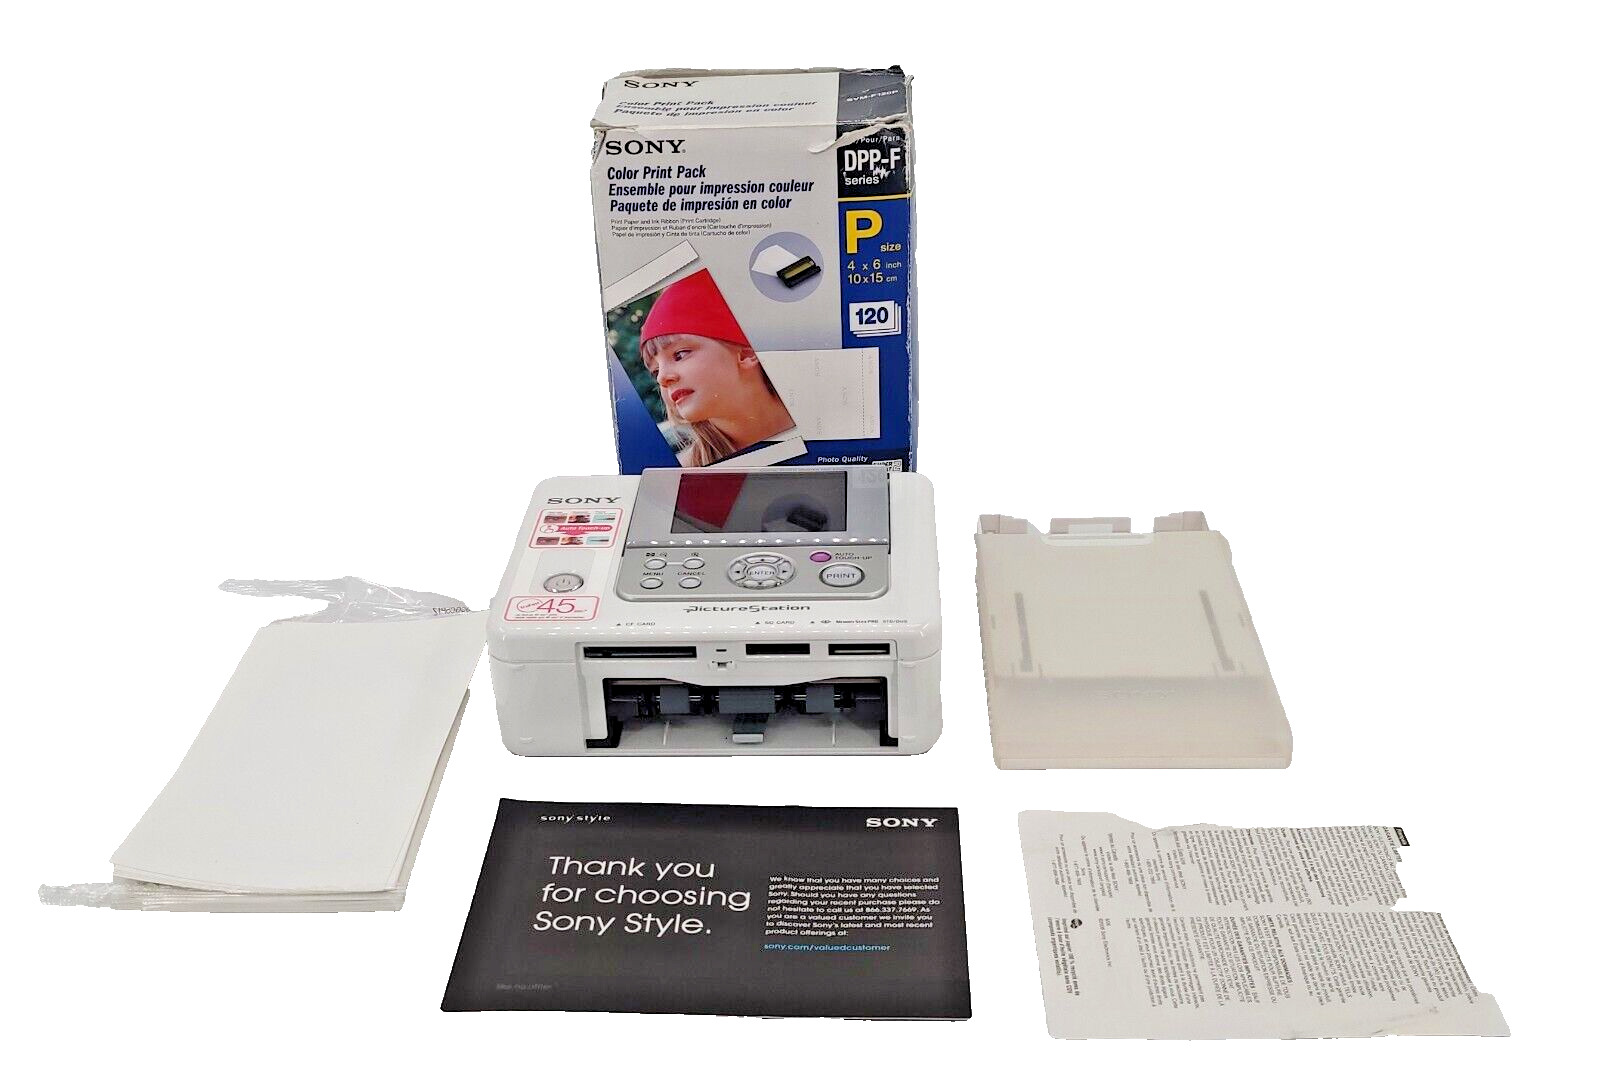 Sony Picture Station Photo Printer DPP-FP90